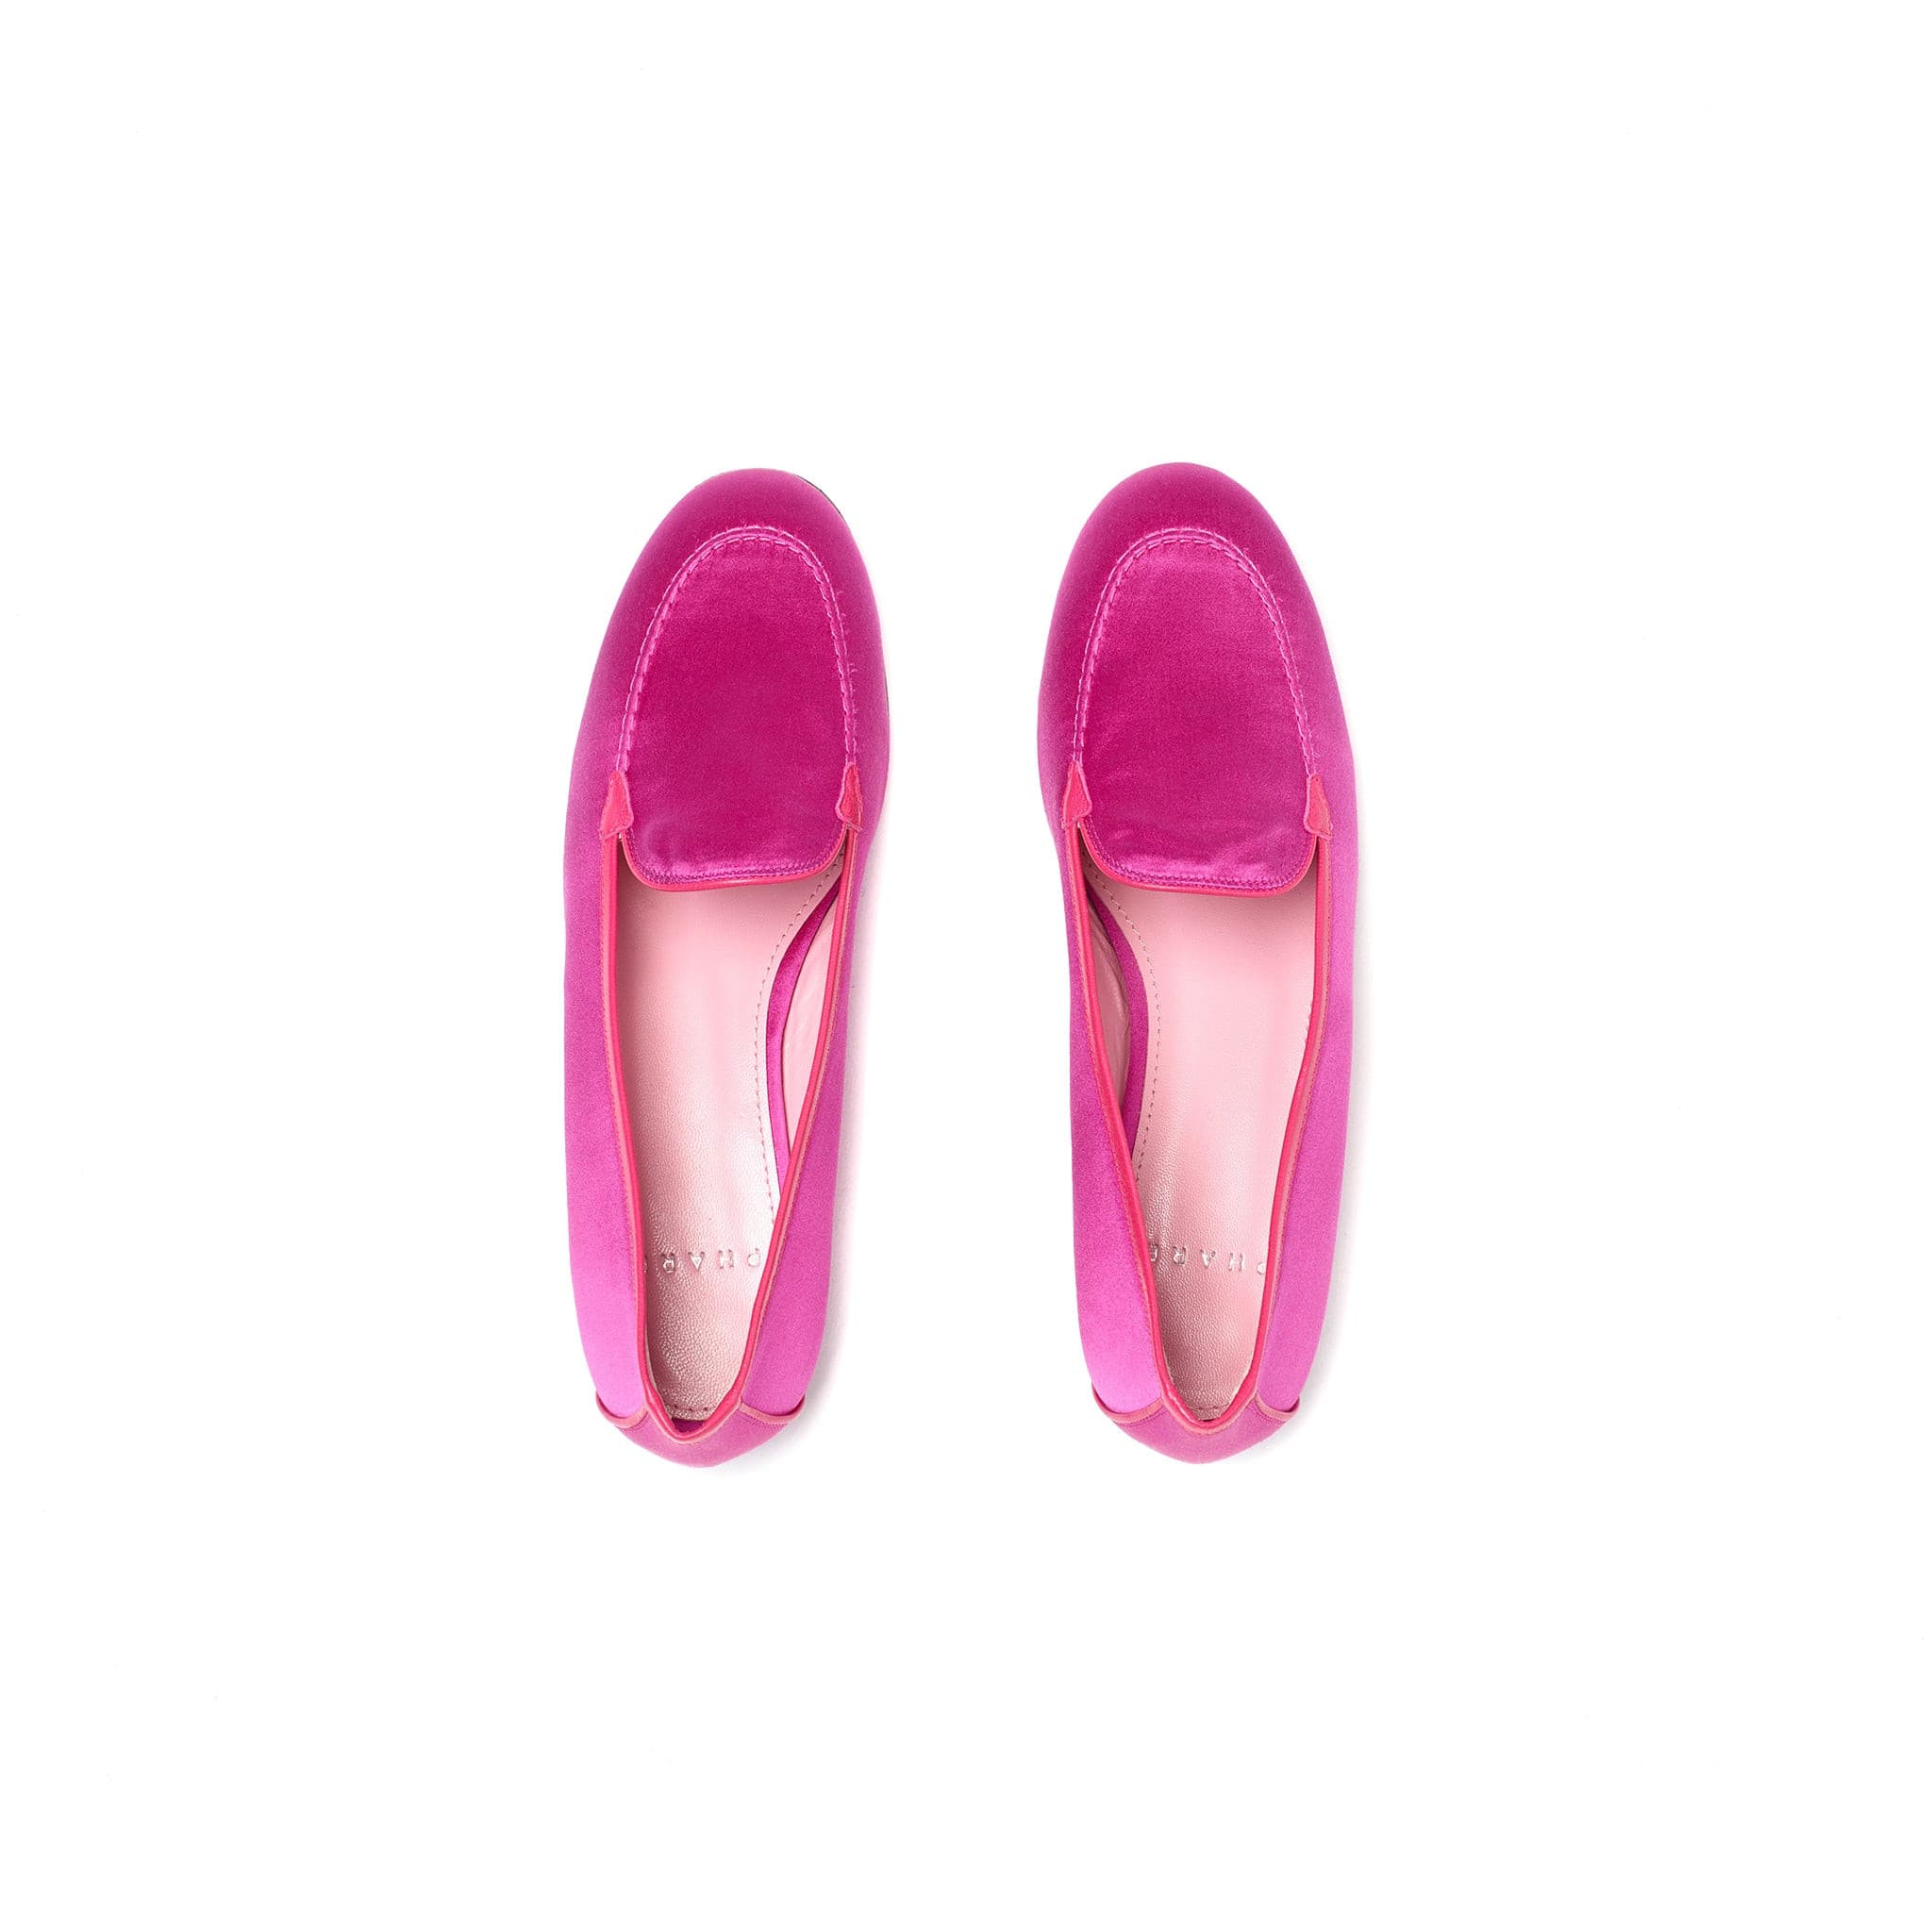 Phare classic loafer in magenta silk satin top view 